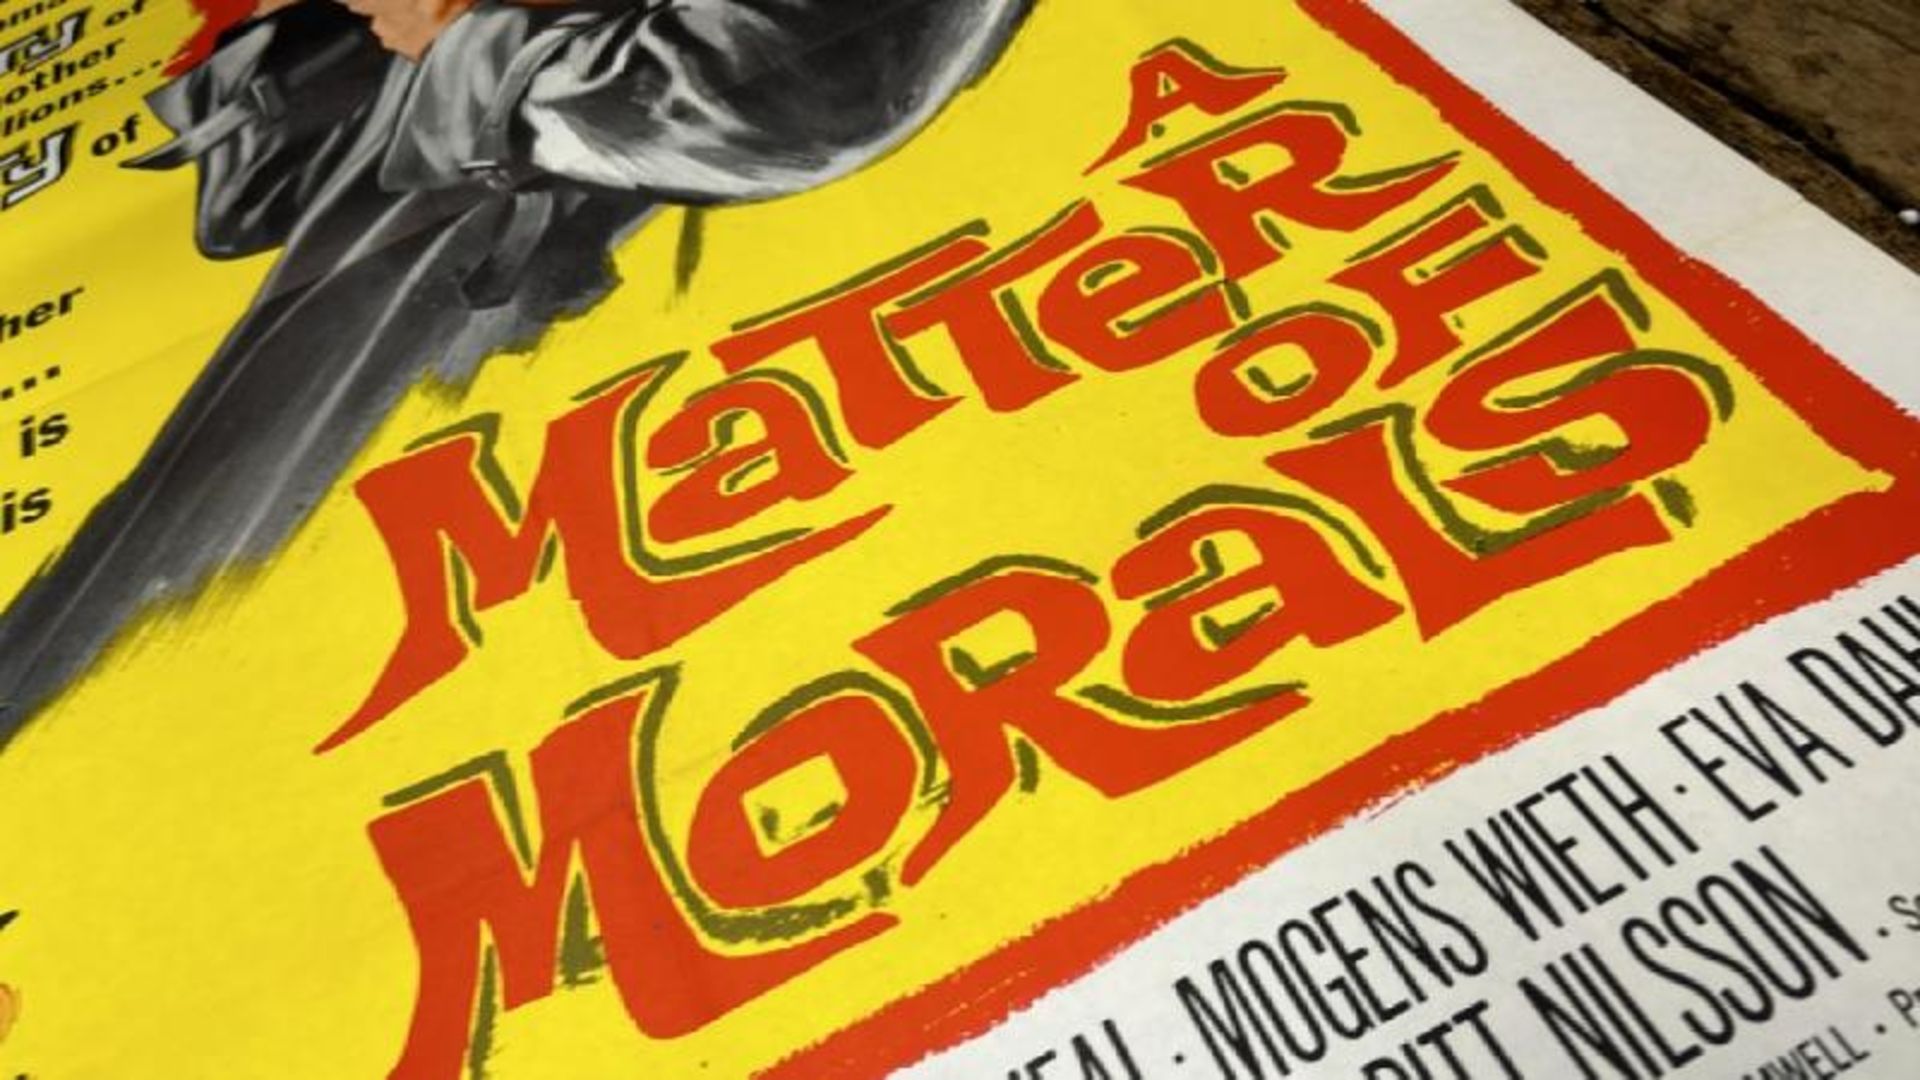 A MATTER OF MORALS, ORIGINAL FILM POSTER, PRINTED IN THE USA, 68.5CM W X 104.5CM H - Image 3 of 5